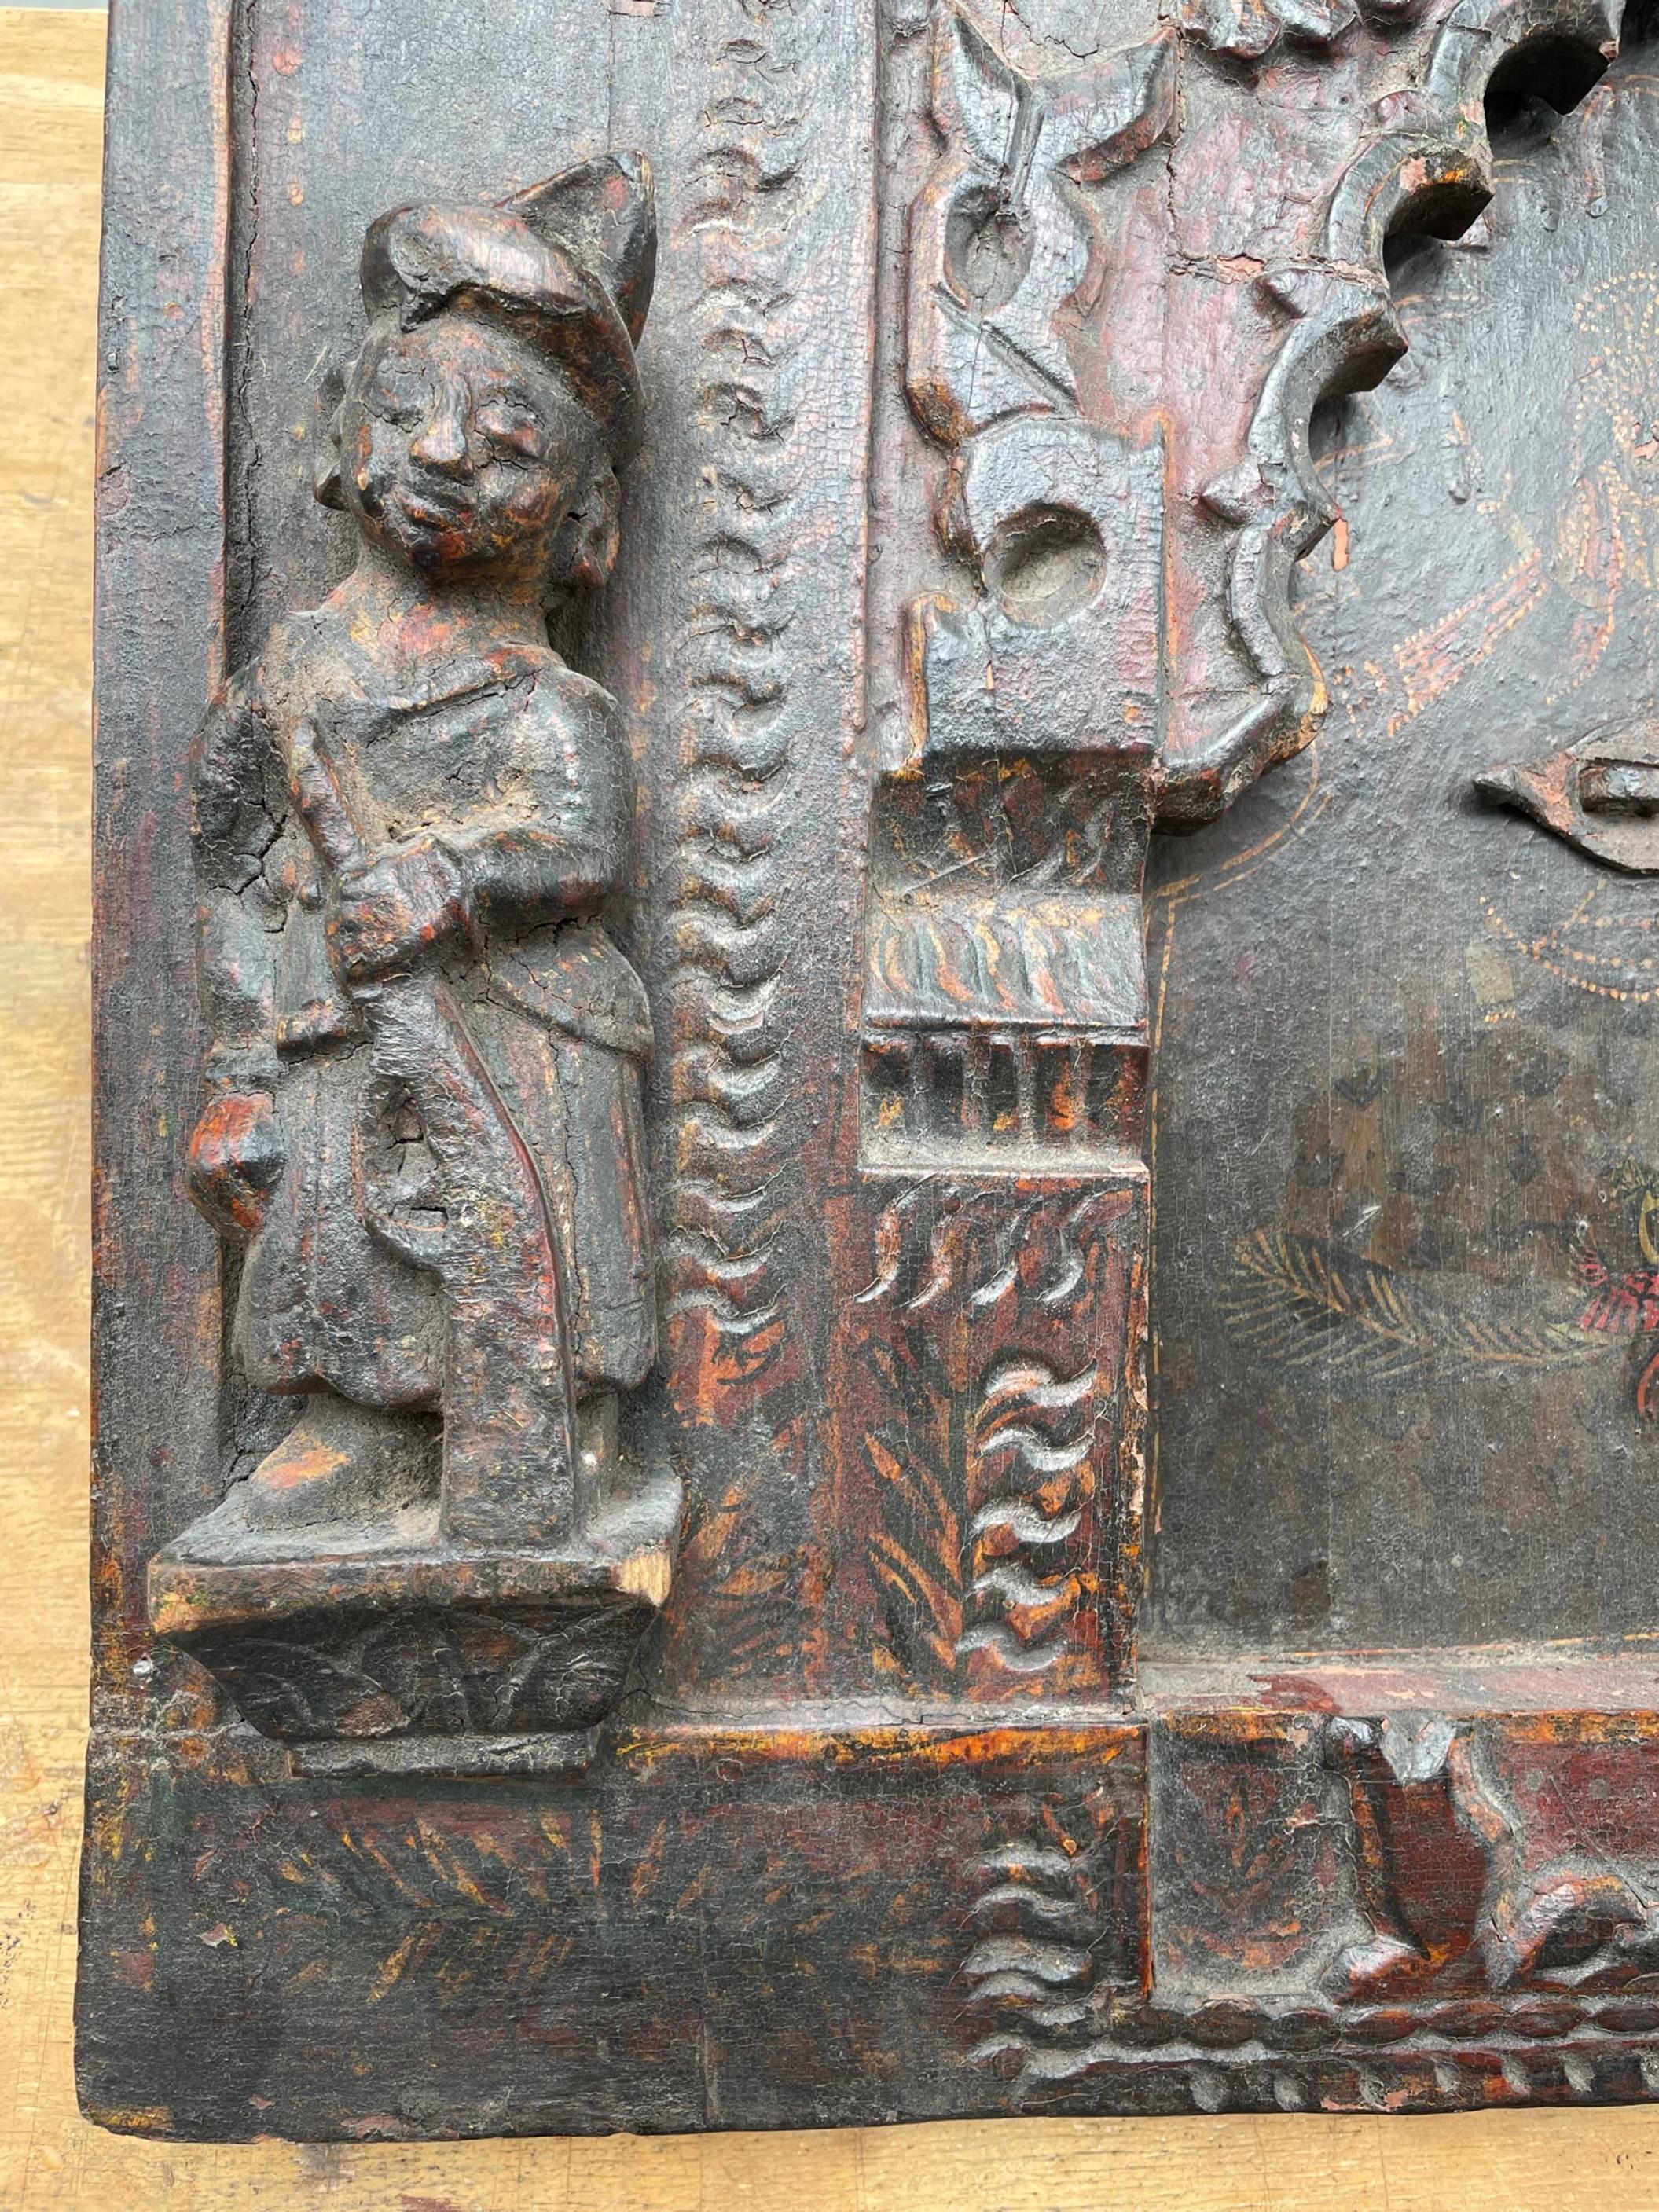 Ancient rare India wood hand carved polychrome wall panel with iron lock.

Exciting and dramatic wood carving of a wall panel from India. It is probably from the 17th-18th century. Very heavy exotic wood is used to hand carve the frame with the